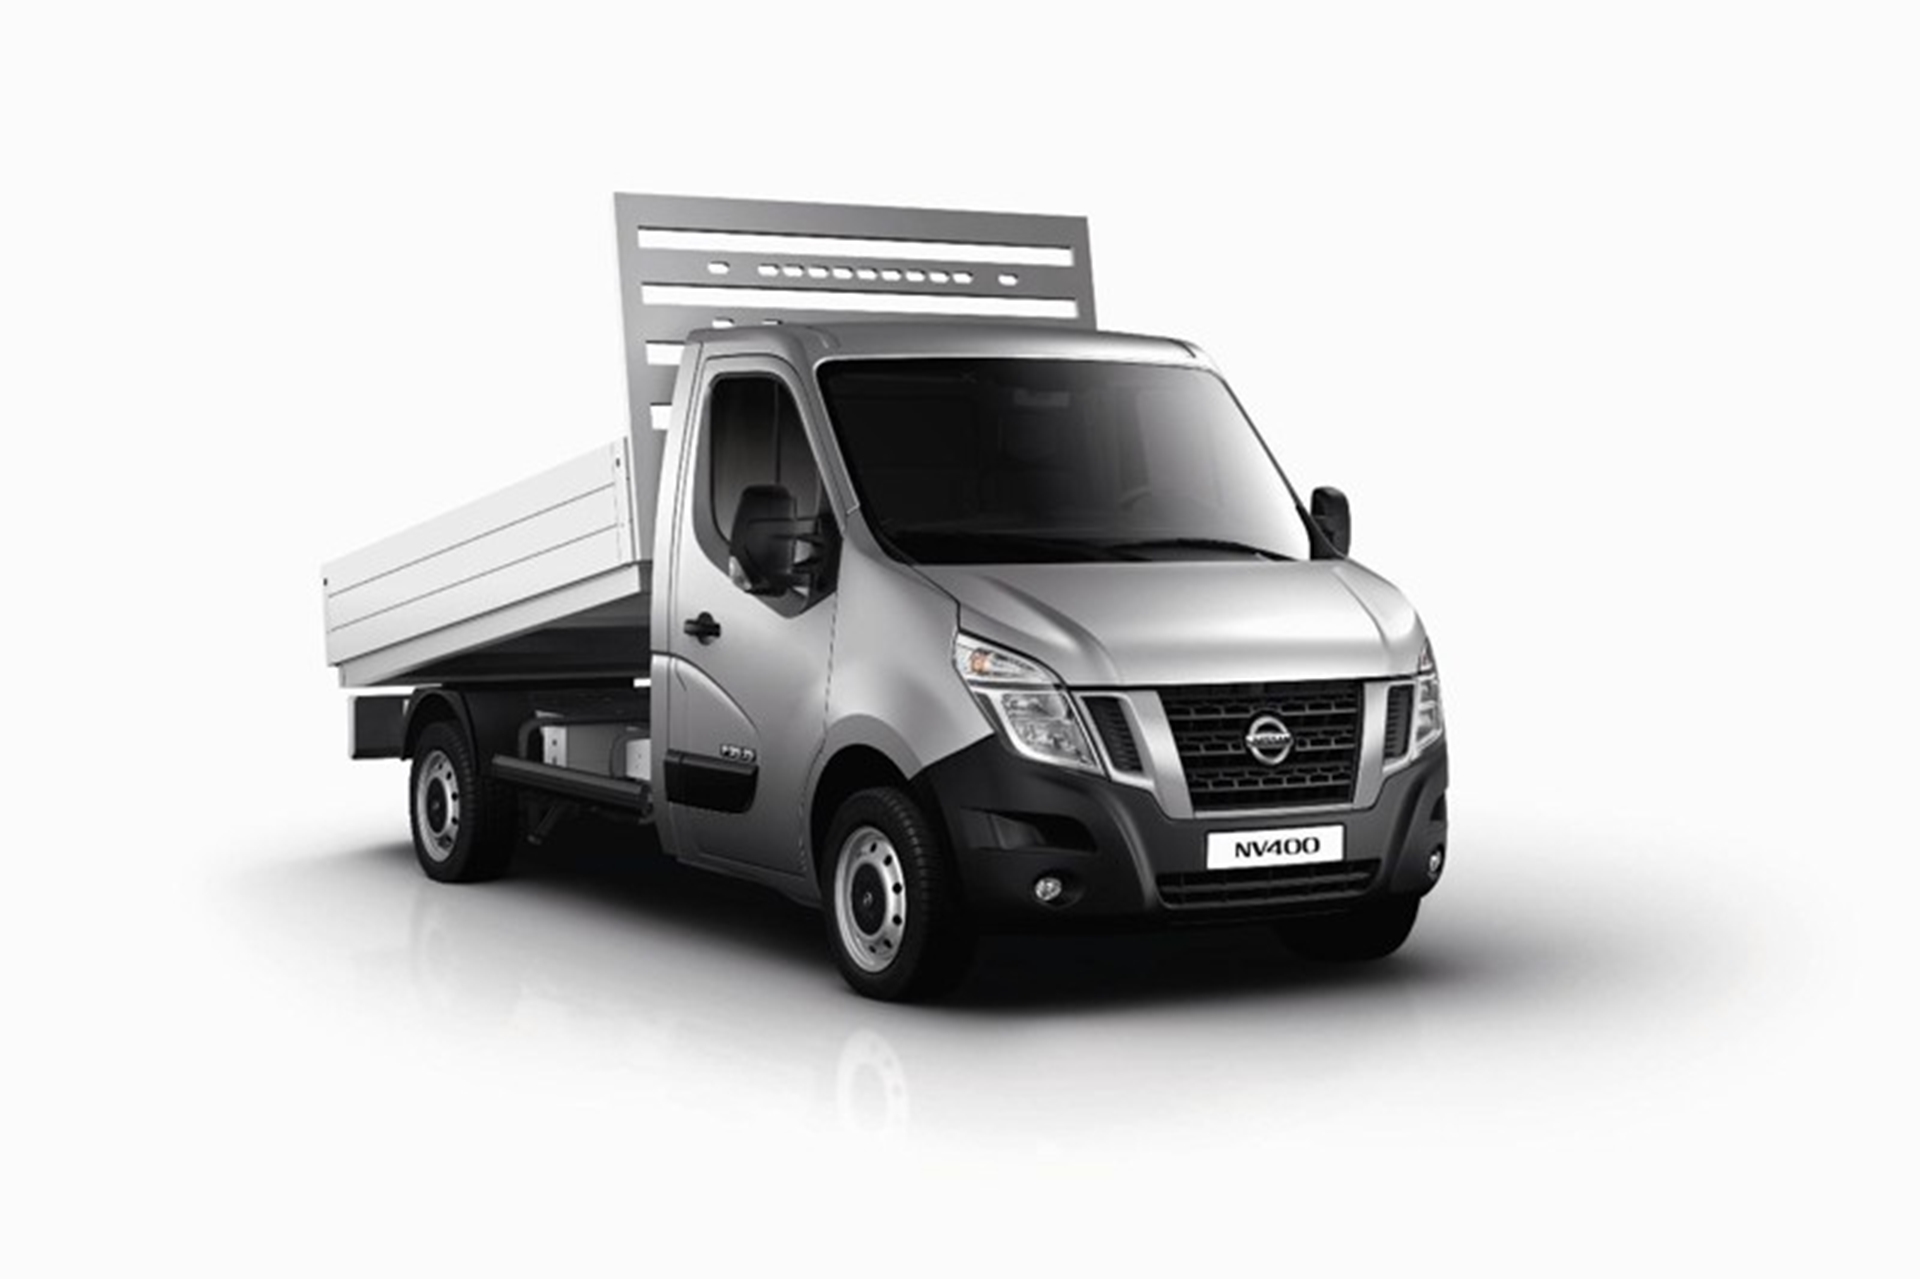 Nissan Exclusively Reveals NV400 Chassis Cab Range and New Vehicle Bodybuilder Strategy at CV Show